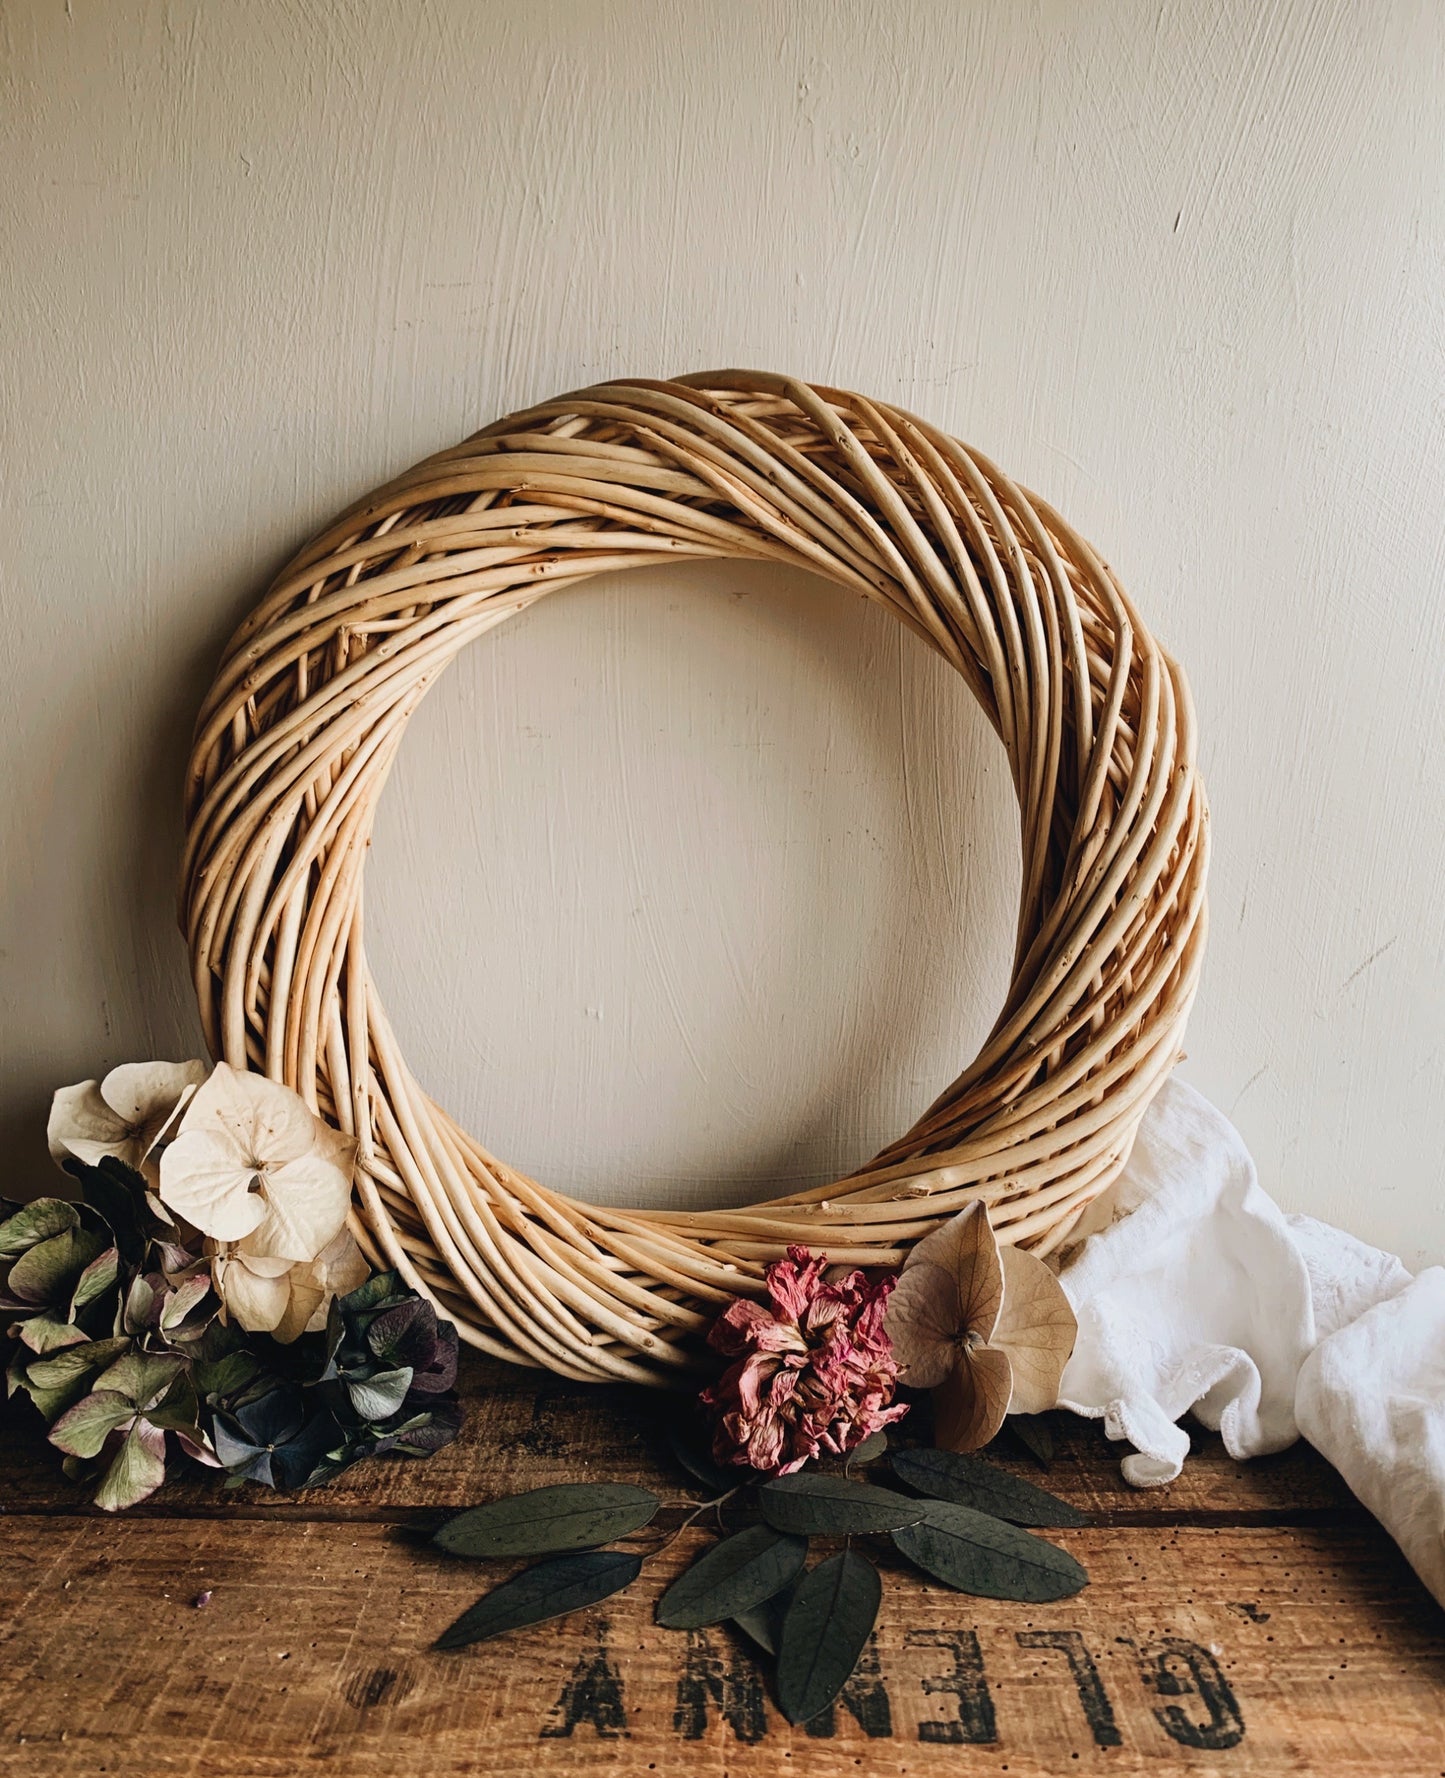 Rustic Wicker / Rattan Wreaths ~ two sizes available